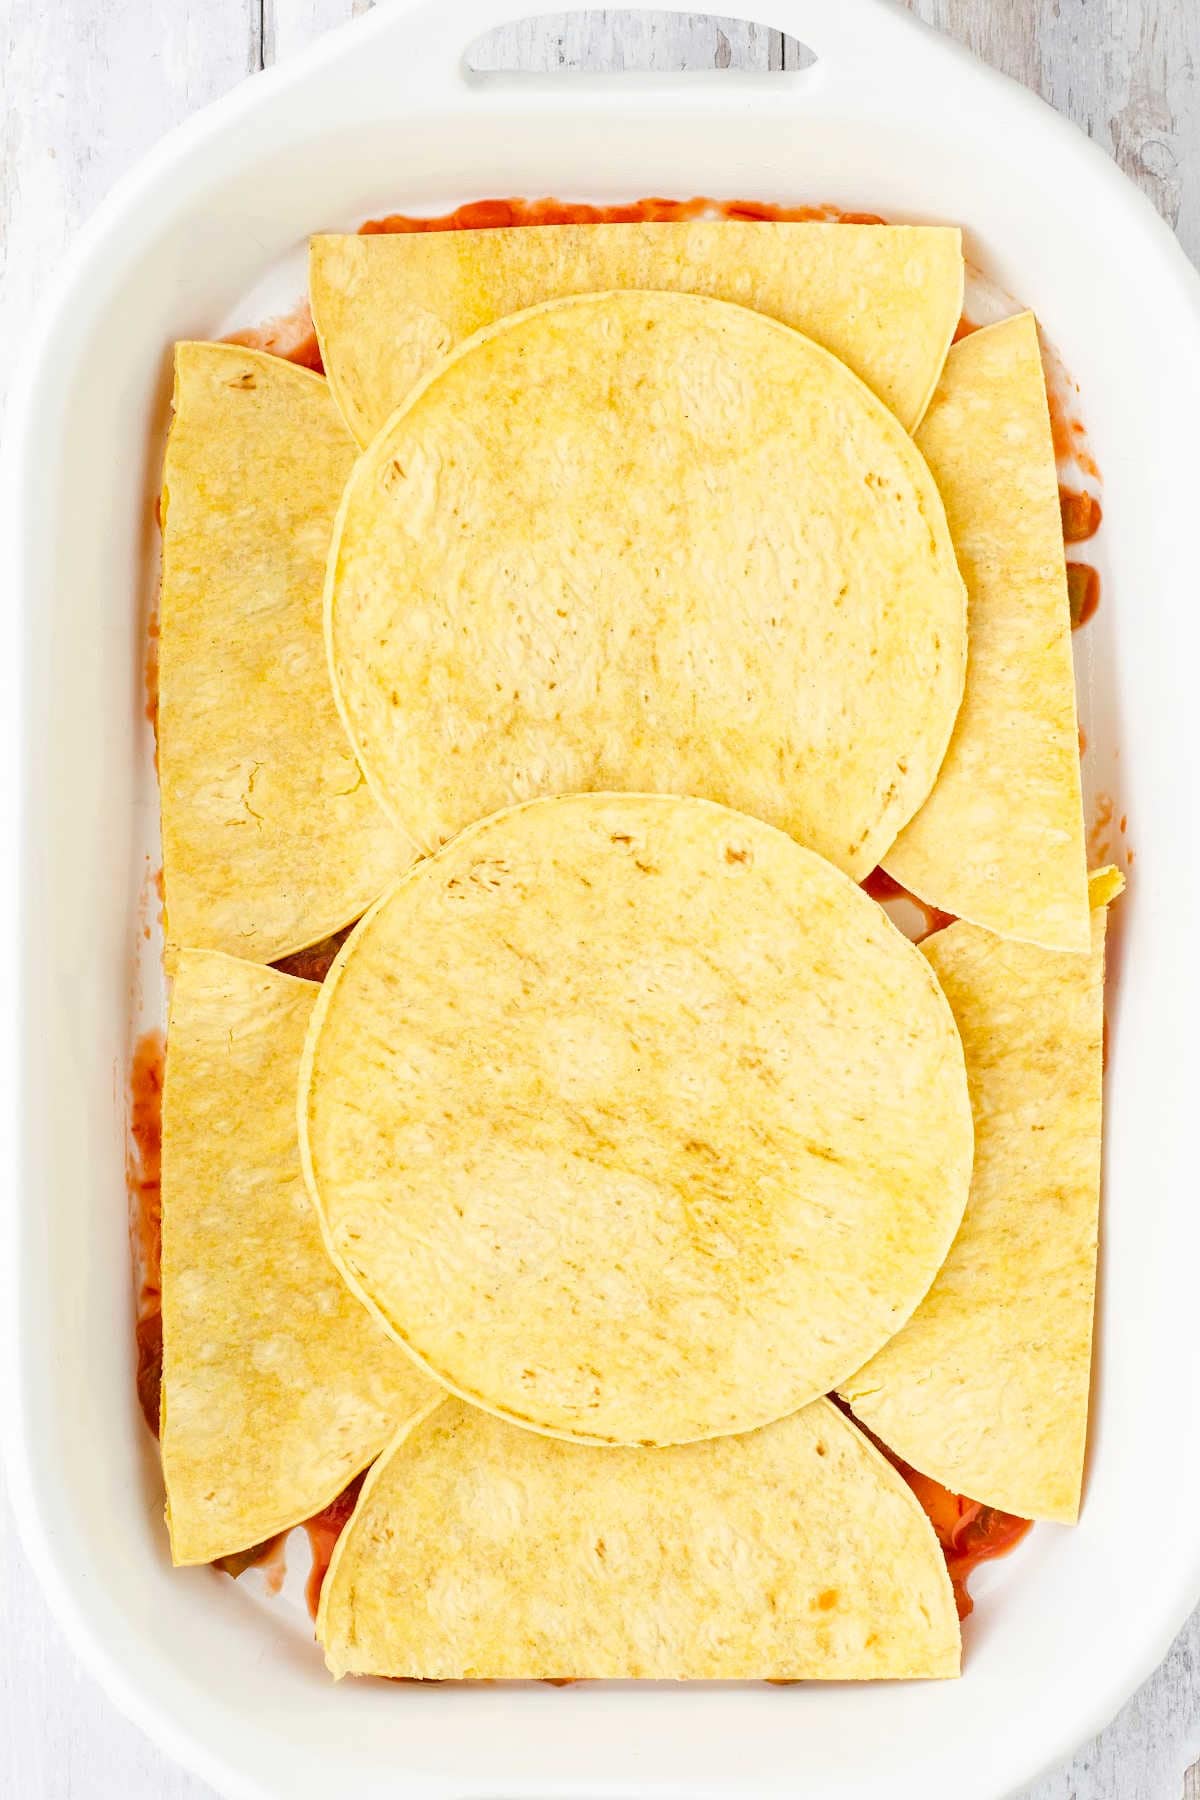 A layer of corn tortillas in a baking dish.